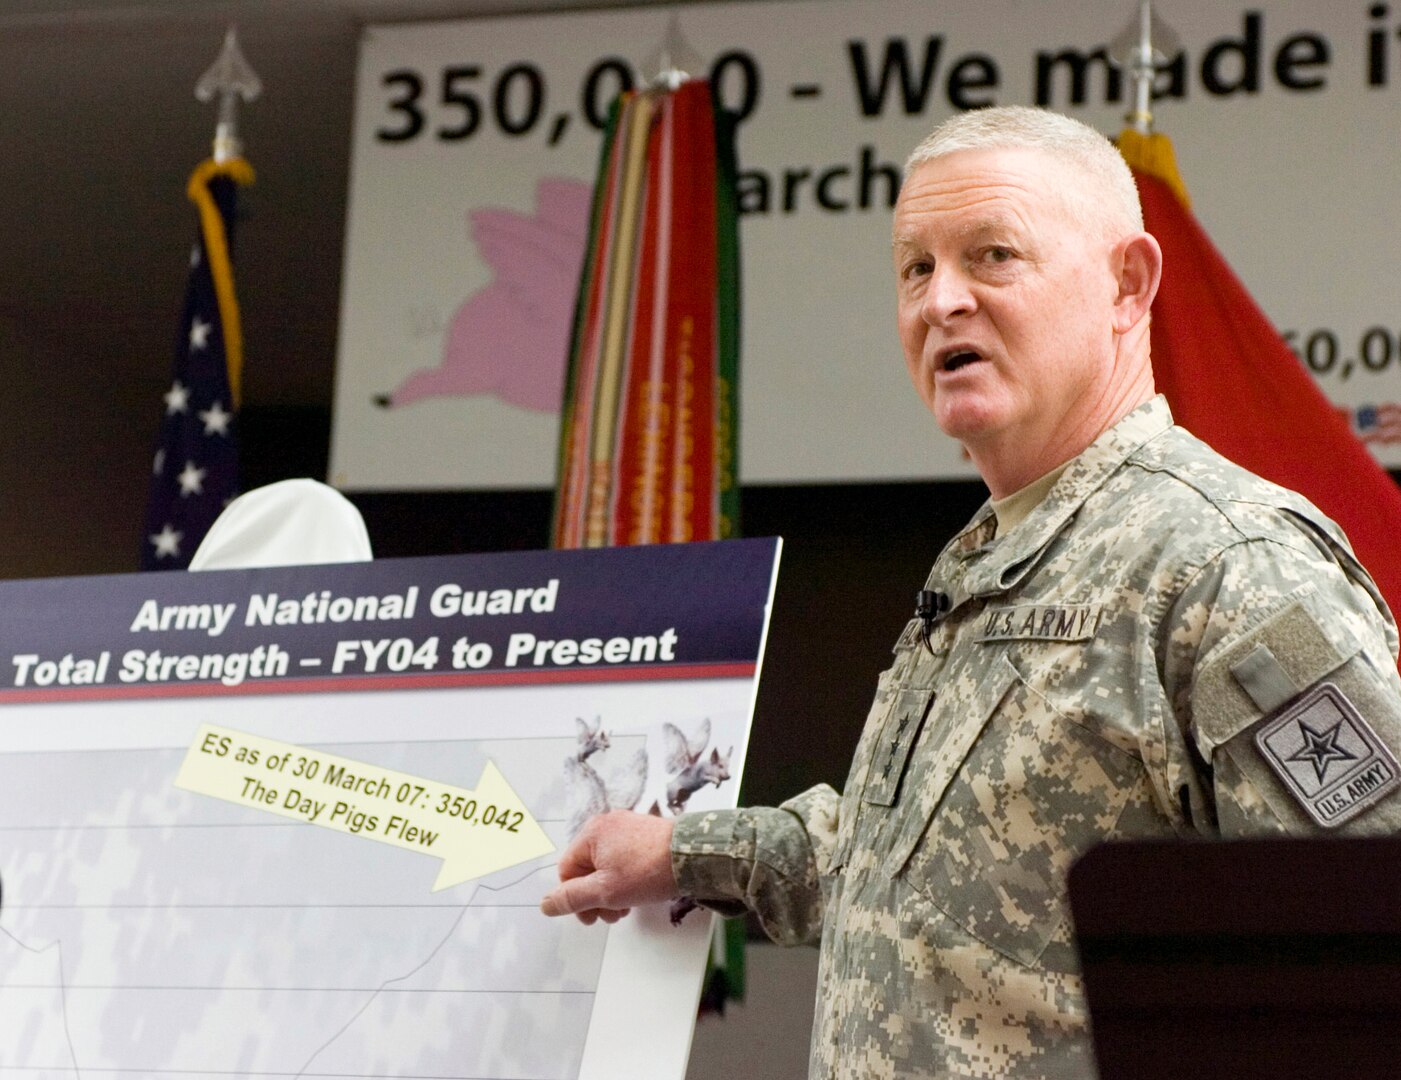 Lt. Gen. Clyde Vaughn, director of the Army National Guard, told Citizen-Soldiers gathered at the Army National Guard Readiness Center in Arlington, Va., on April 18, 2007, that the Army National Guard had reached its congressionally authorized end strength of 350,000 on March 30, six months earlier than projected. The general predicted 356,000 by the end of the year if current recruiting programs remain in place.